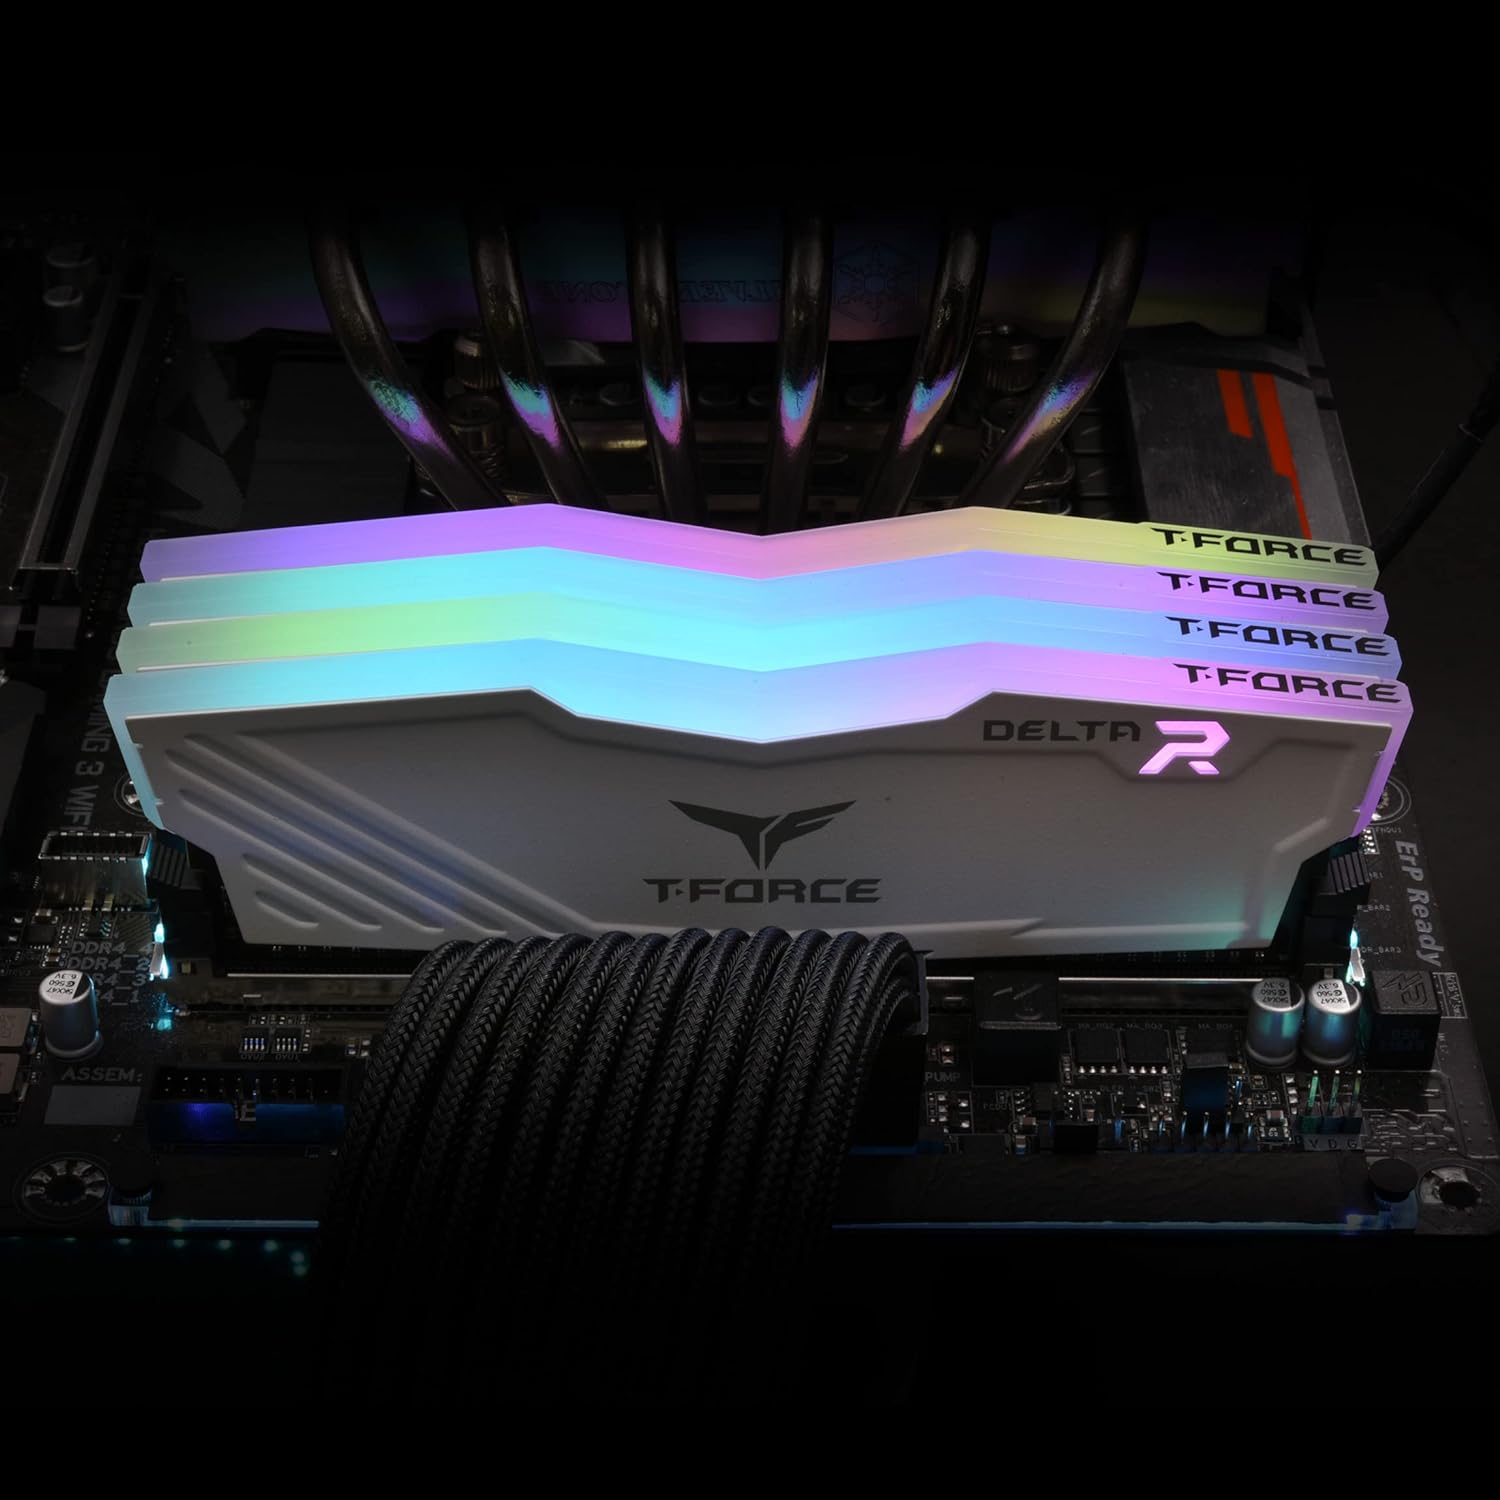 TEAMGROUP T-Force Delta RGB DDR4 16GB RAM - White, DIMM form factor, 3200MHz memory clock speed. 0765441643253